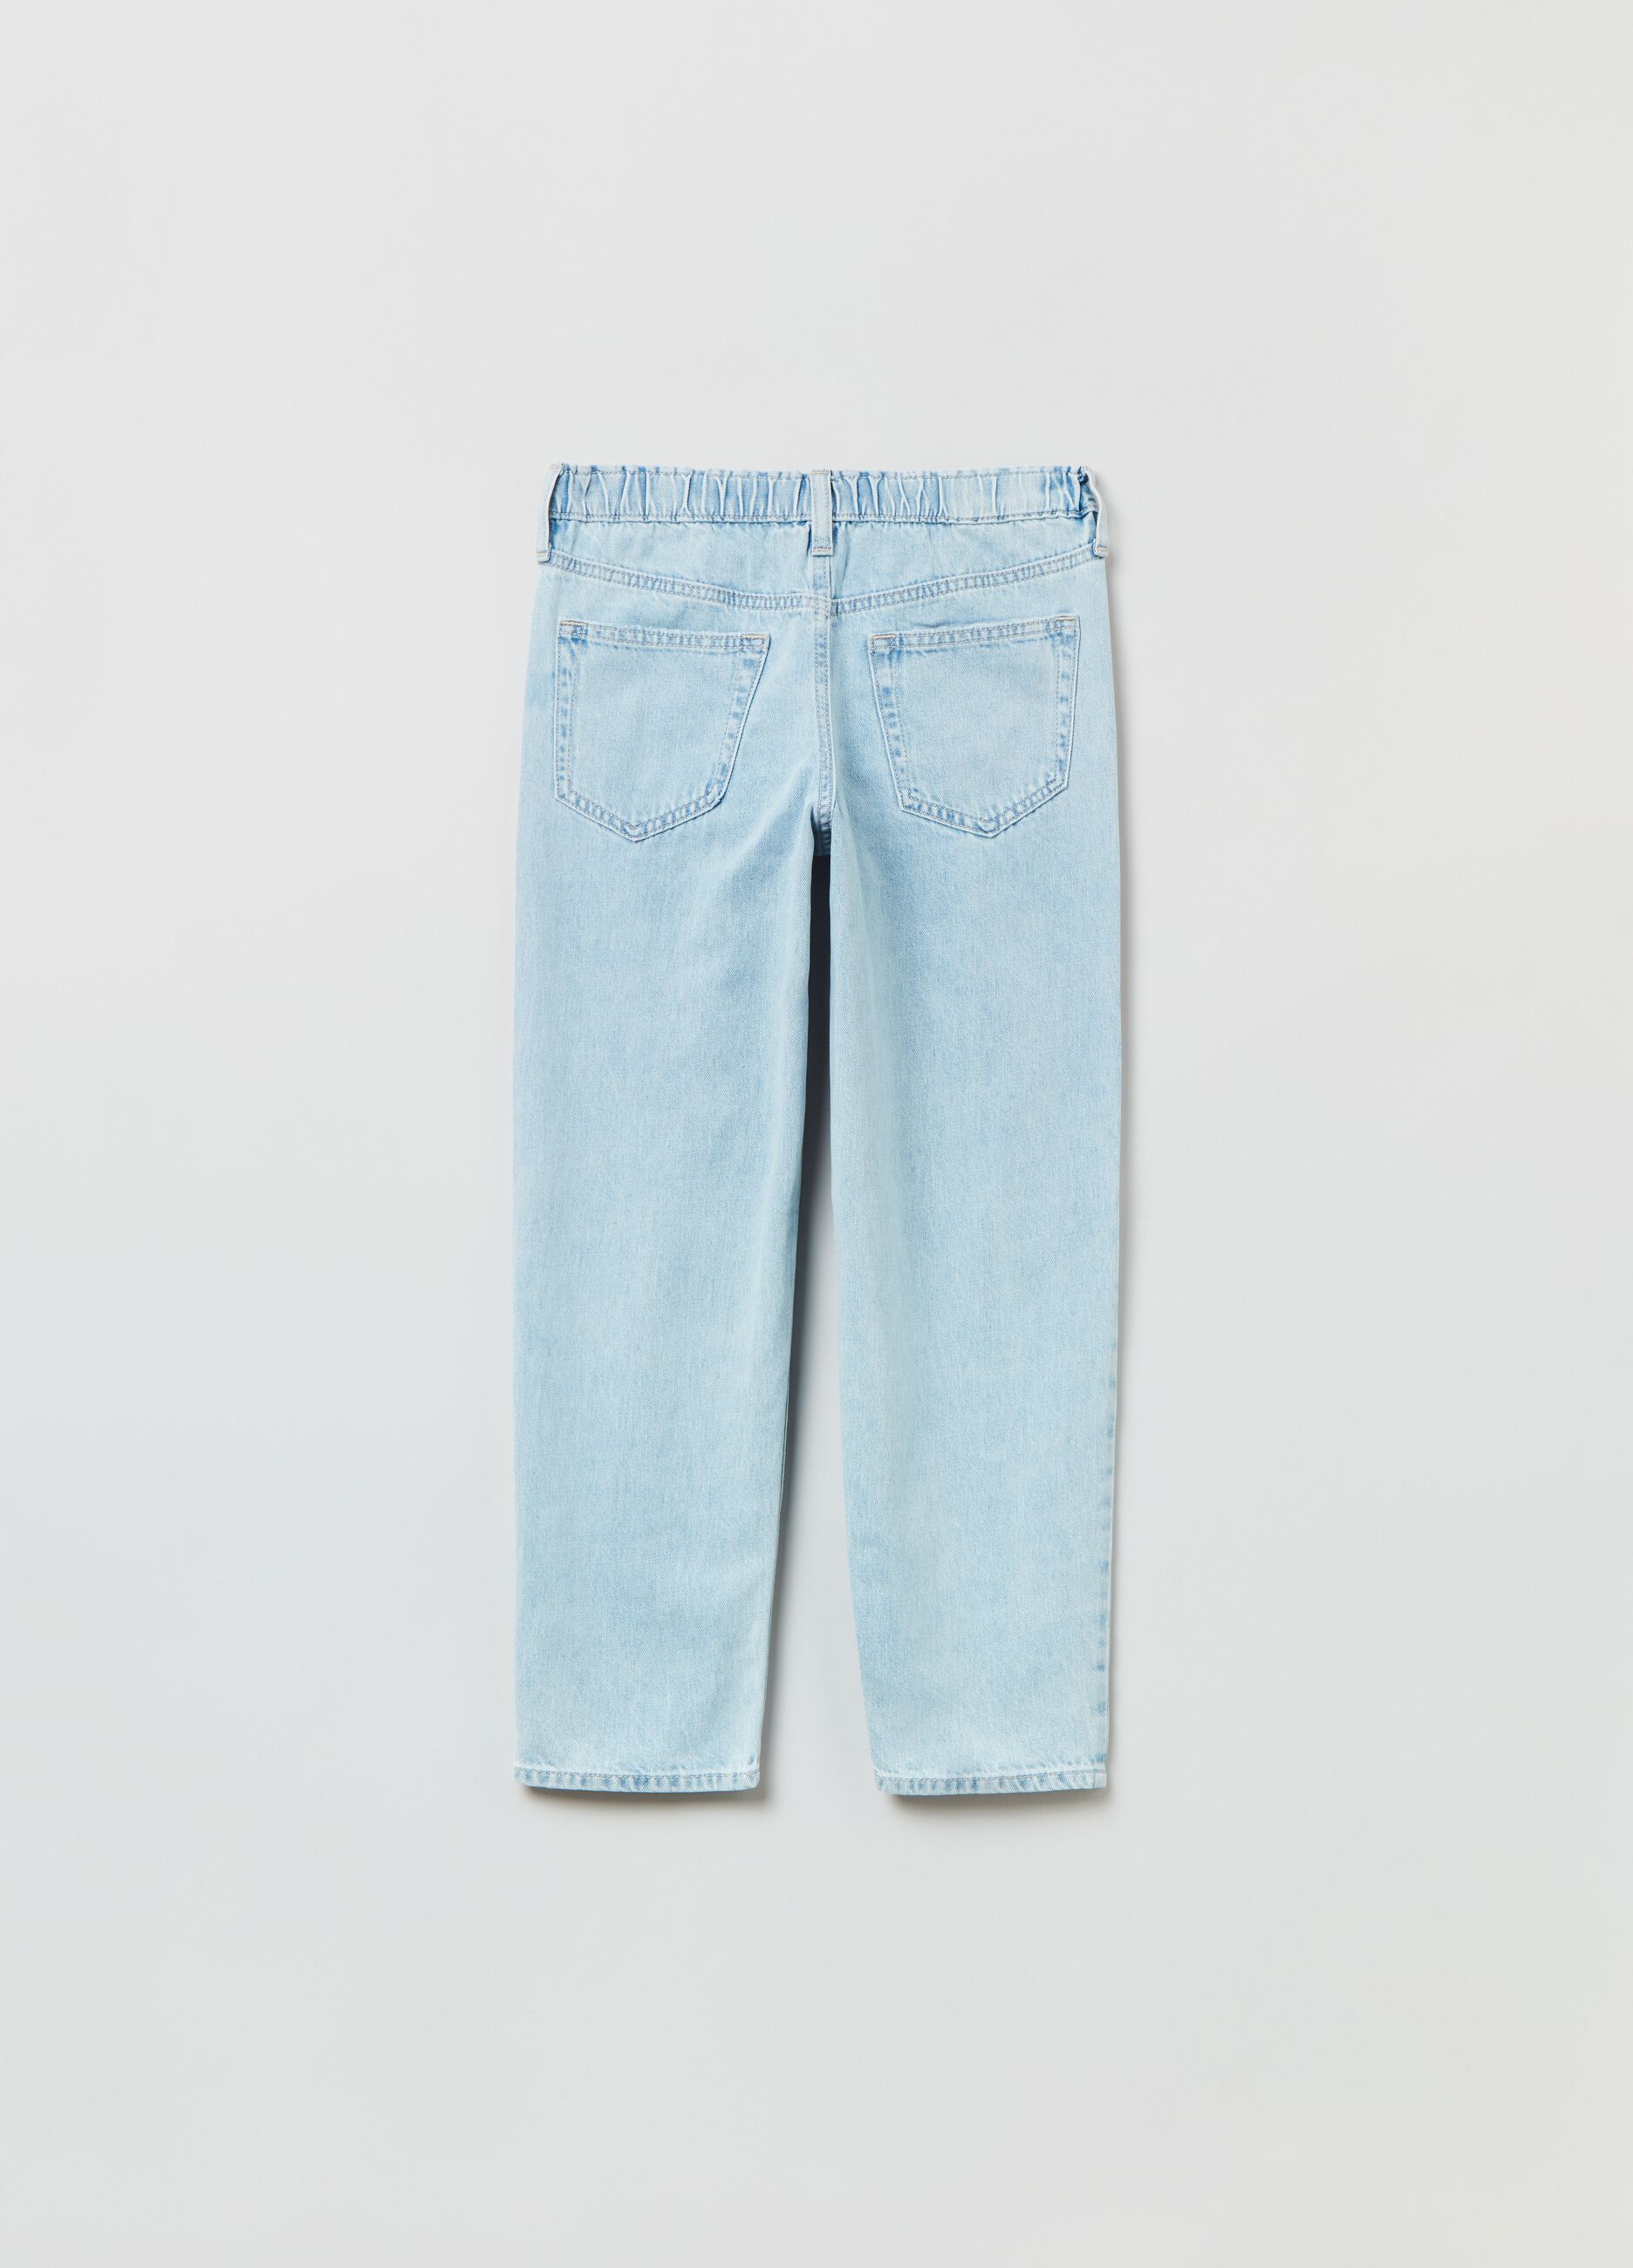 Mum-fit jeans with rips